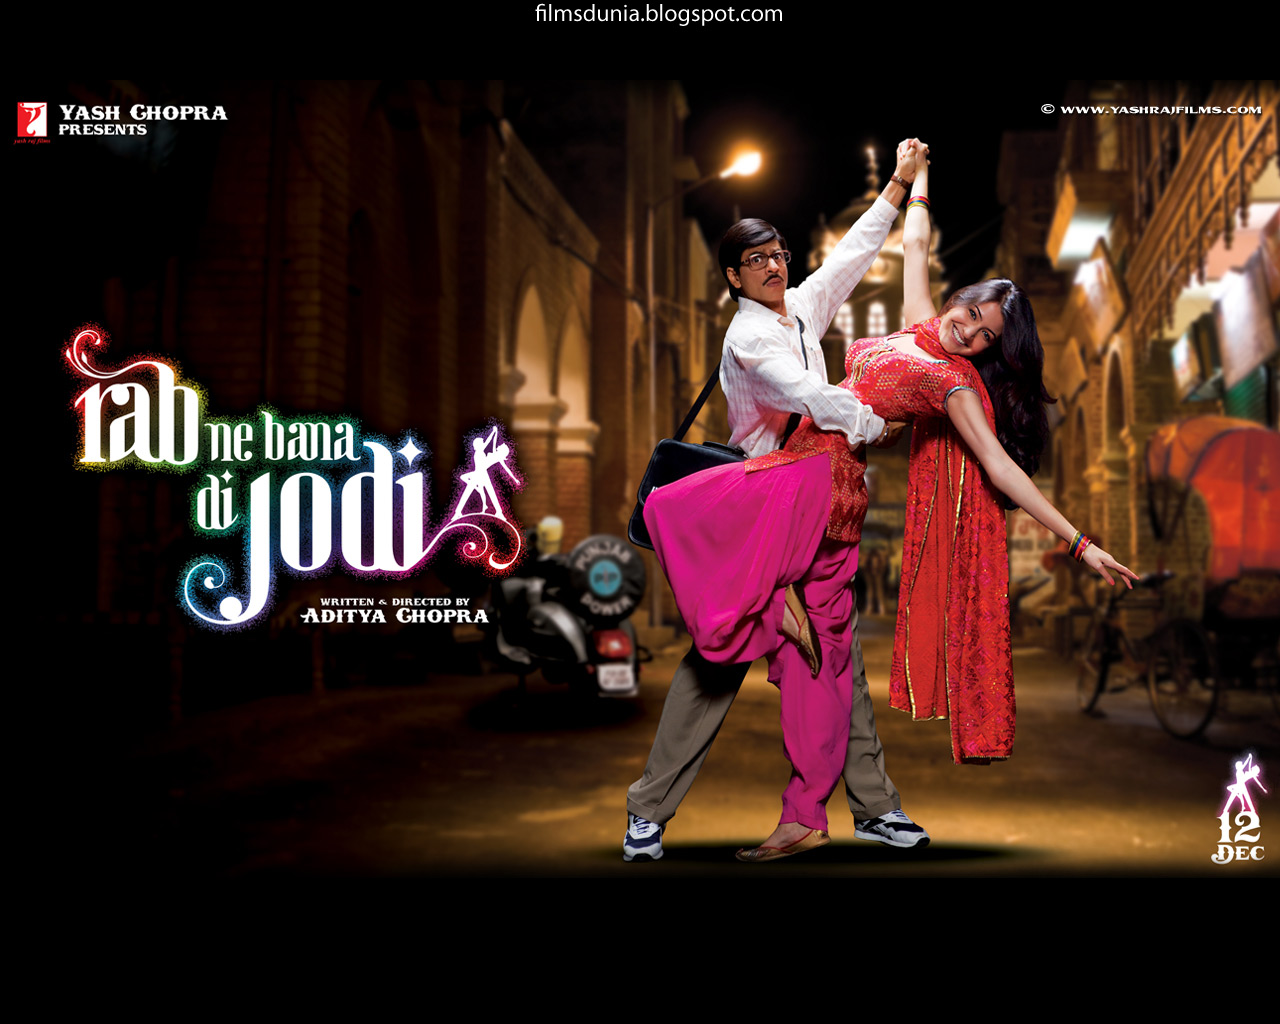 Finally the first promo of Rab Ne Bana Di Jodi was officially released on 